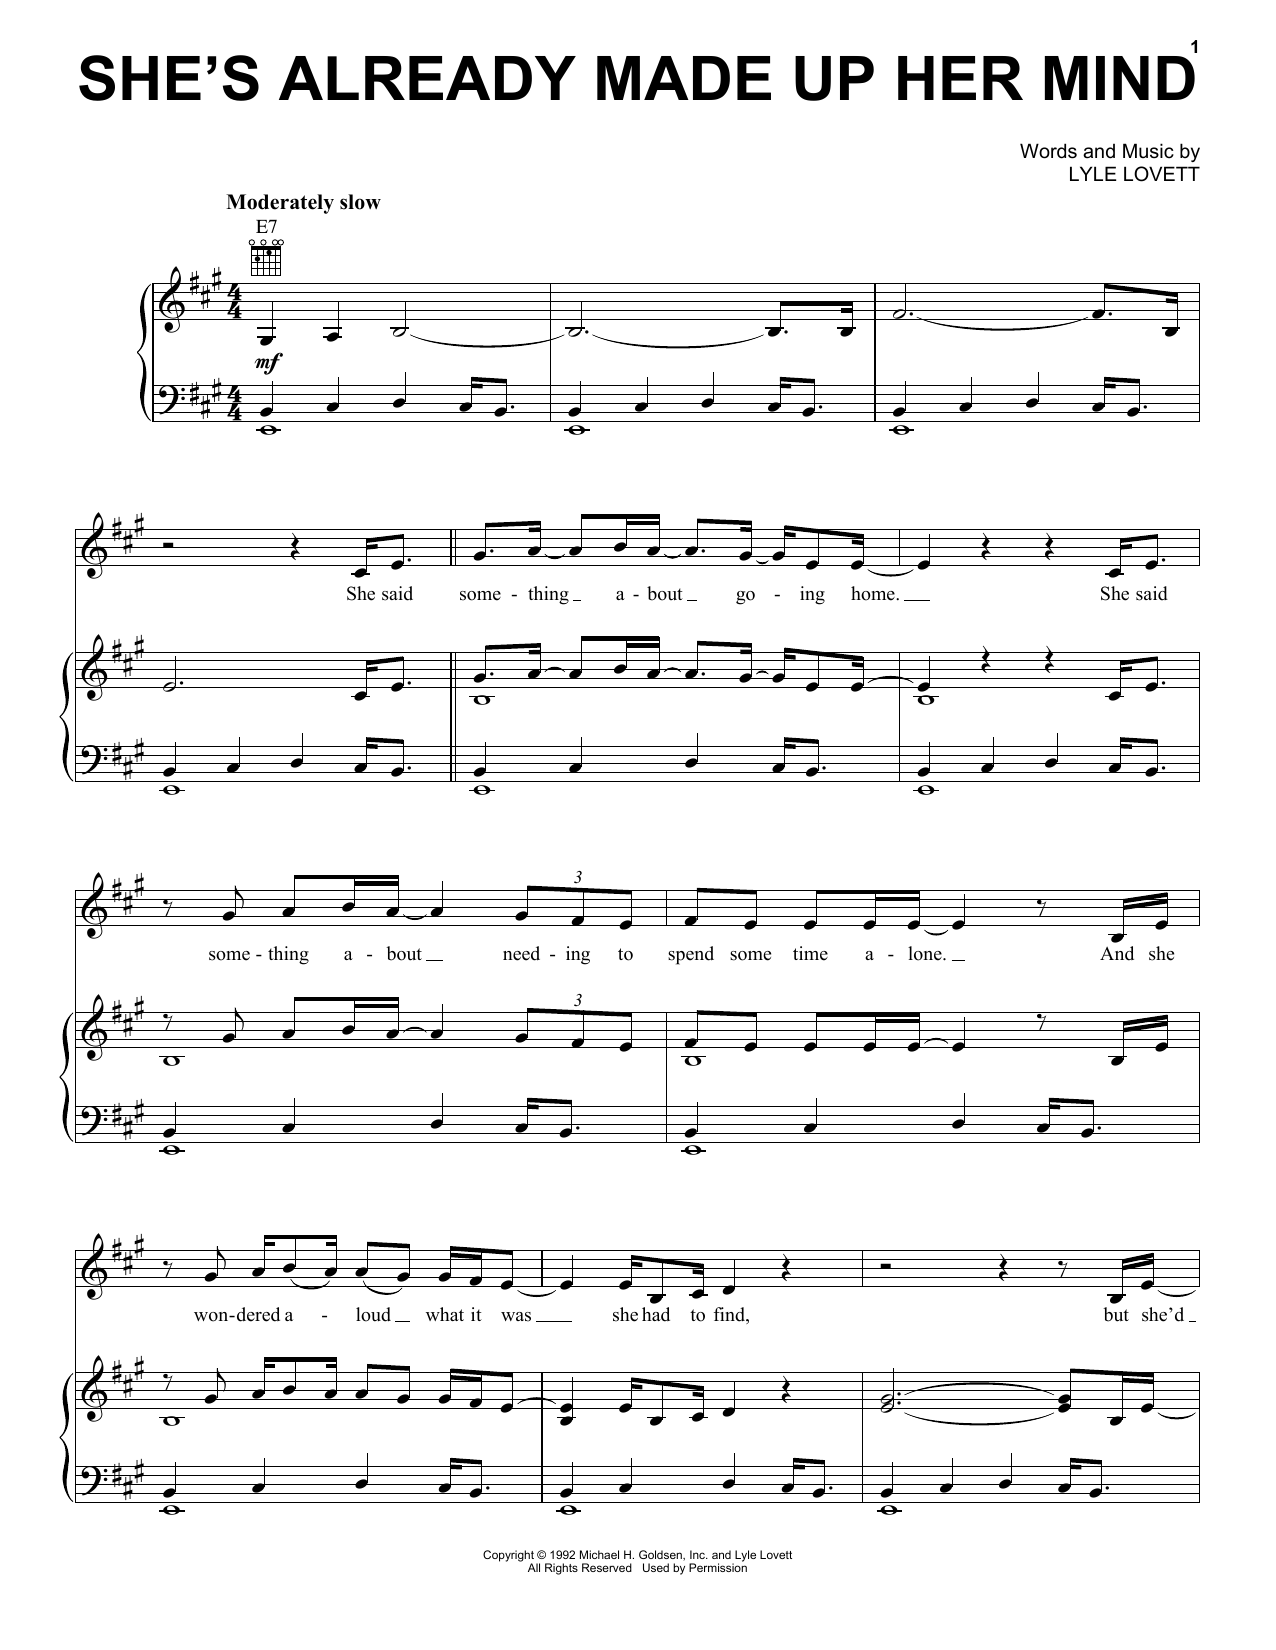 Download Lyle Lovett She's Already Made Up Her Mind Sheet Music